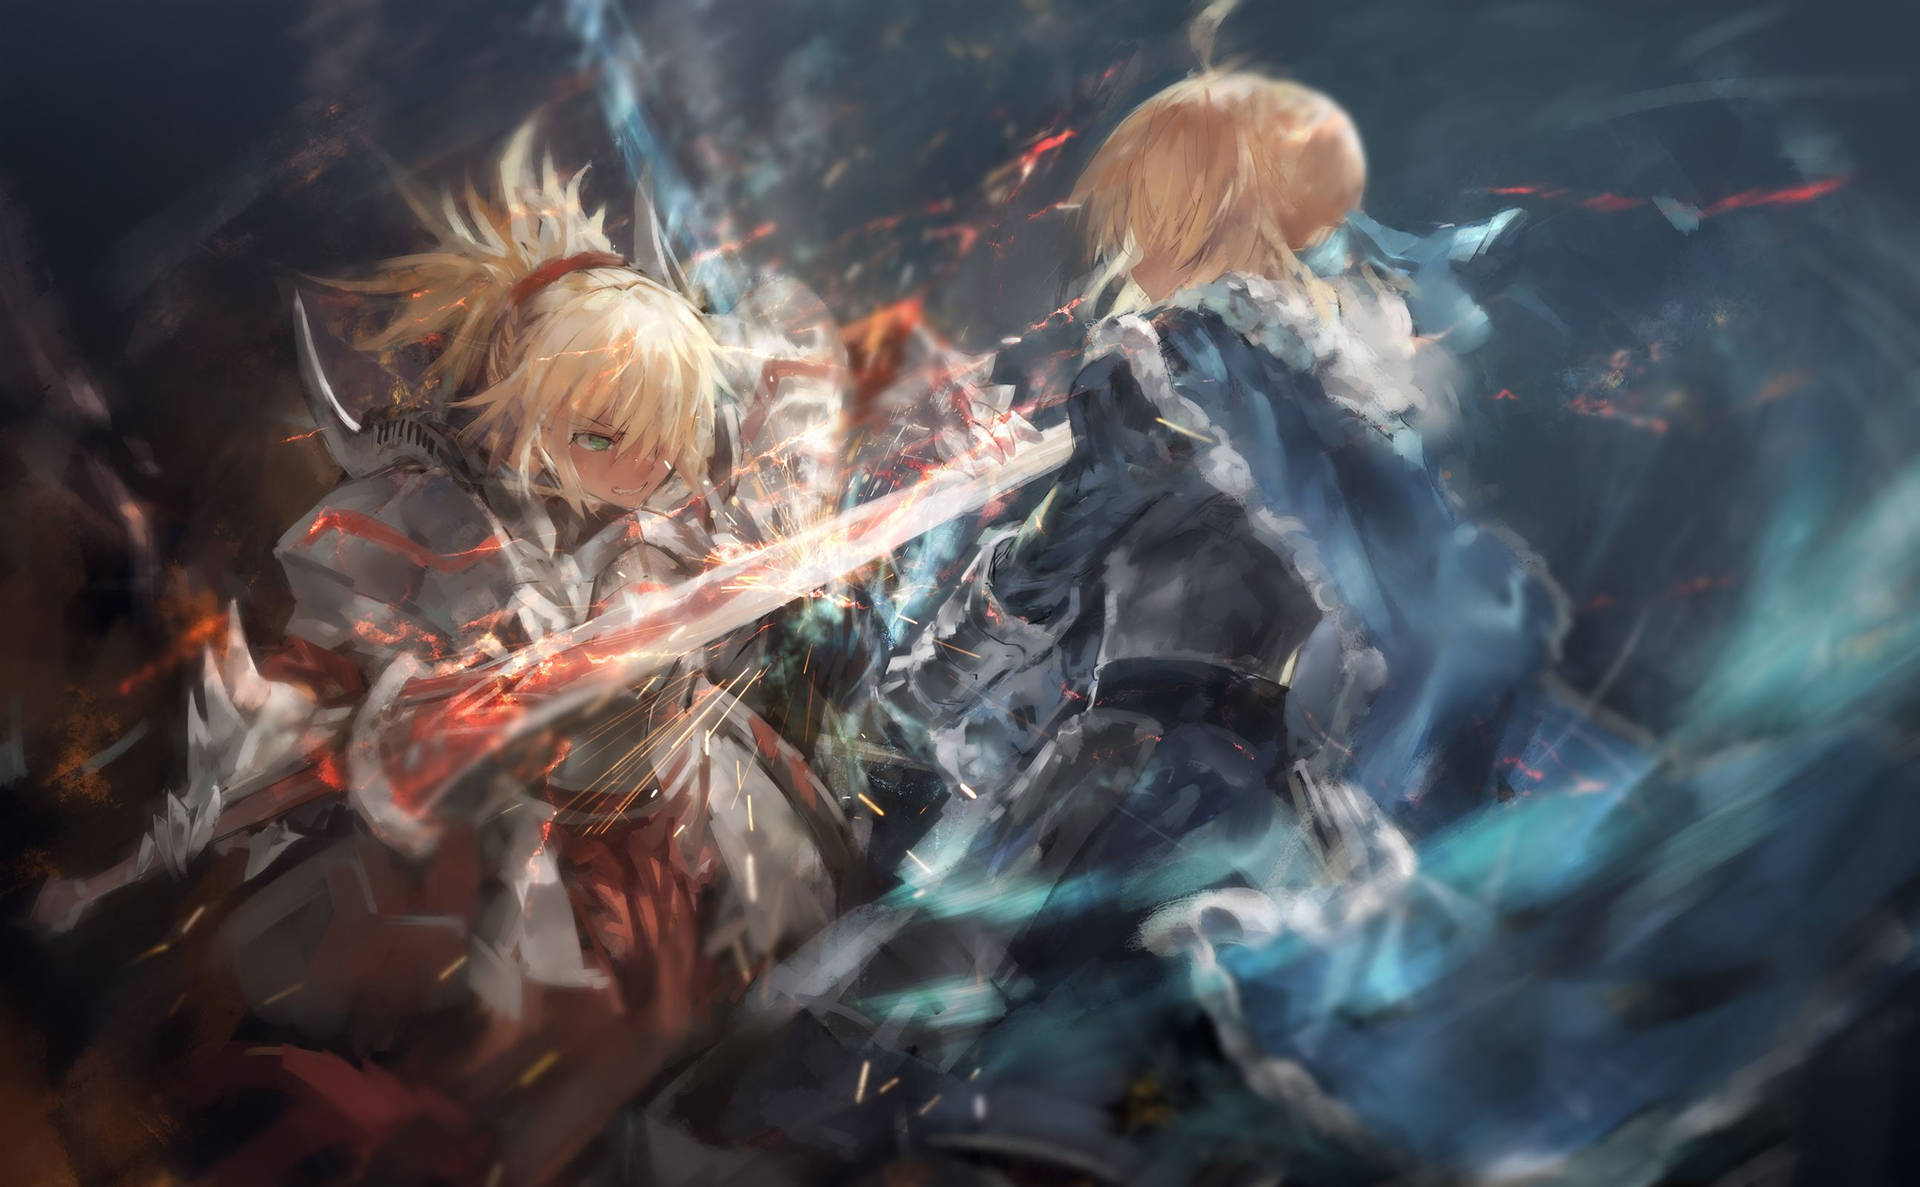 Saber Fighting In Fate / Apocrypha Wallpaper